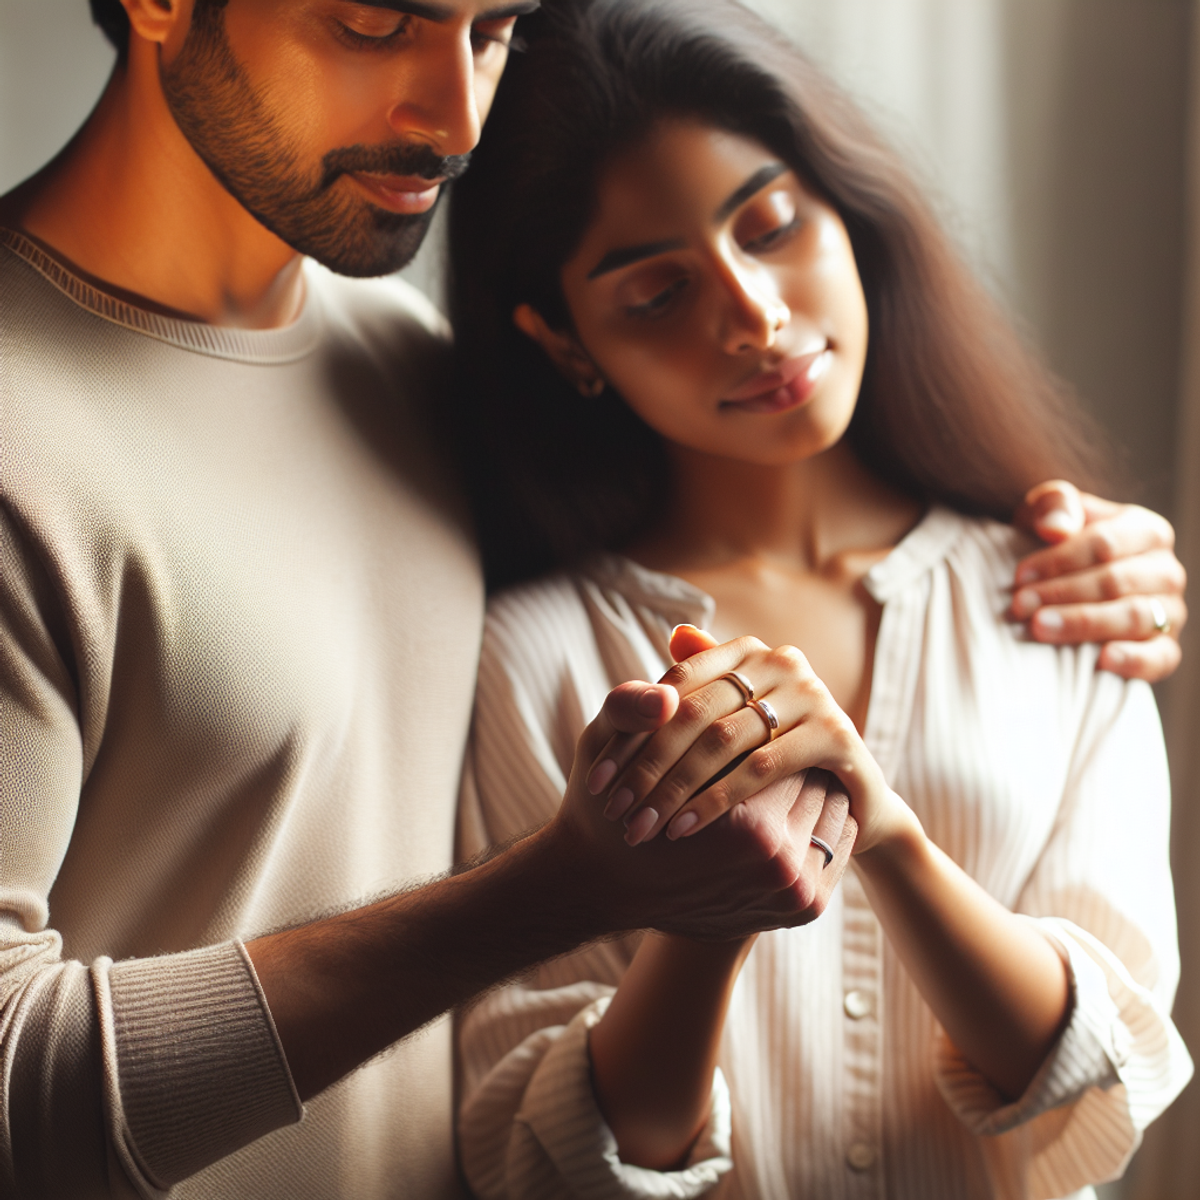 A South Asian man and a Hispanic woman holding hands with wedding rings.